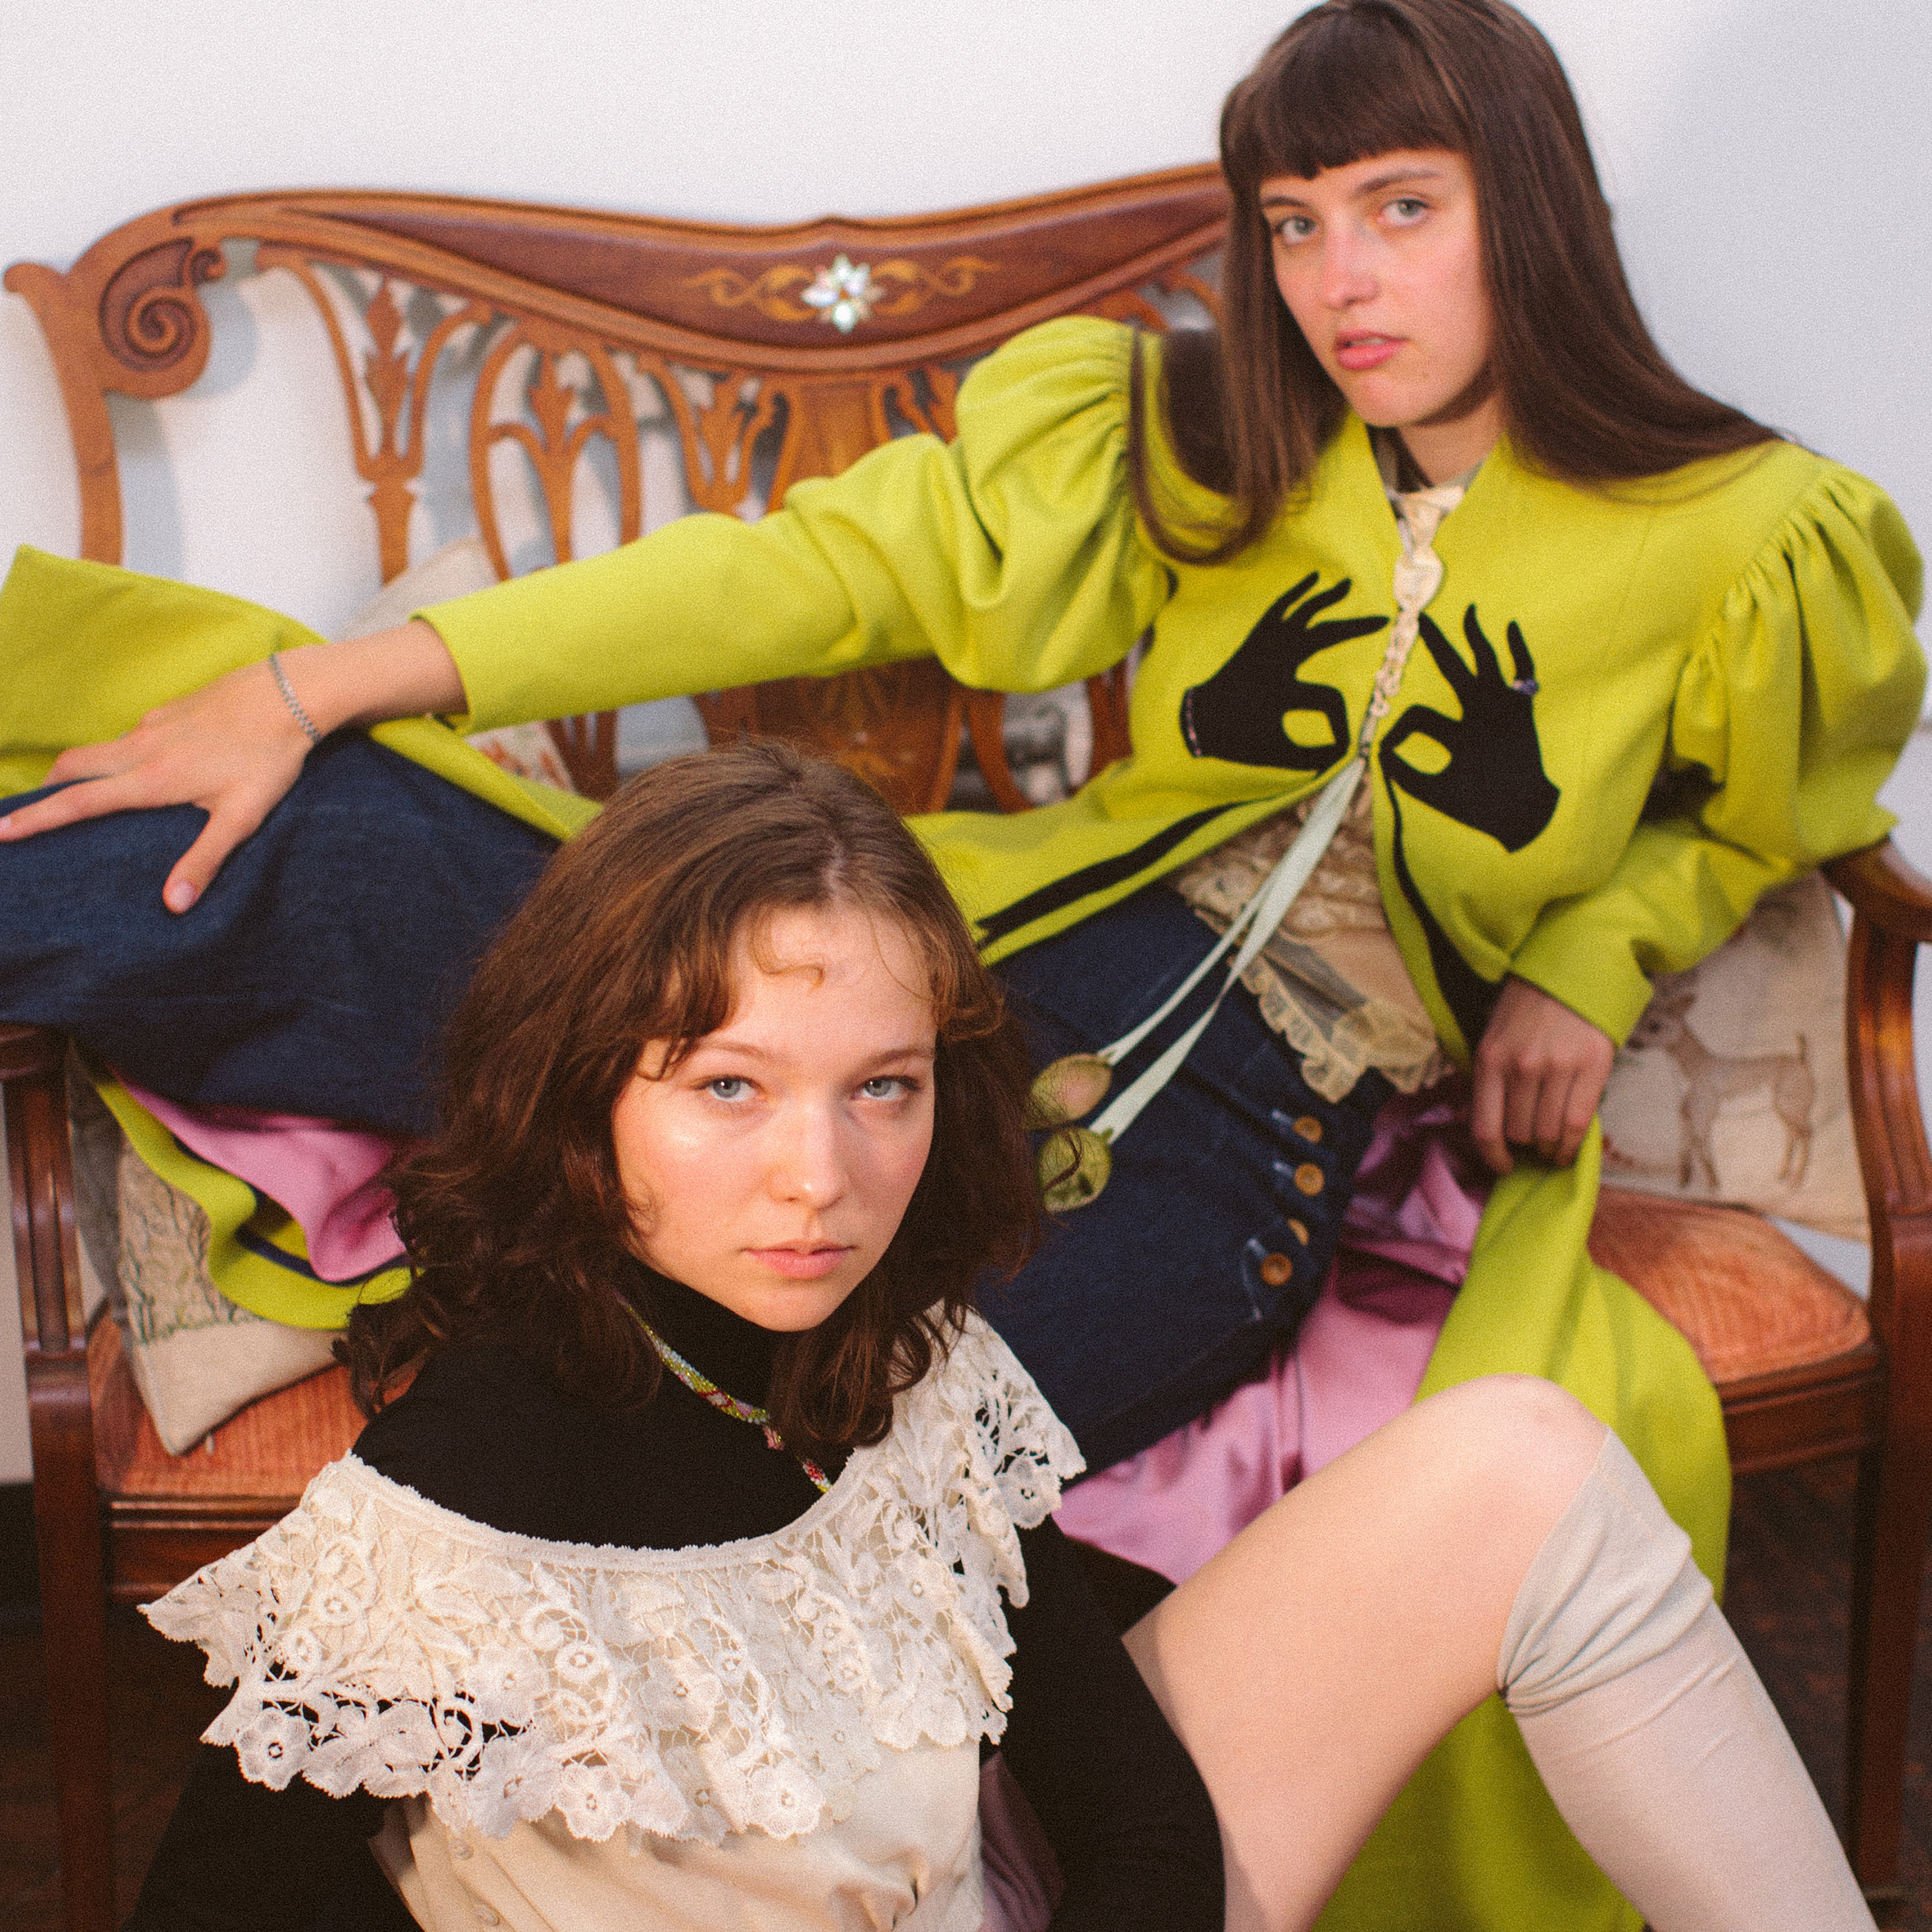 Two models pose together wearing antique clothing